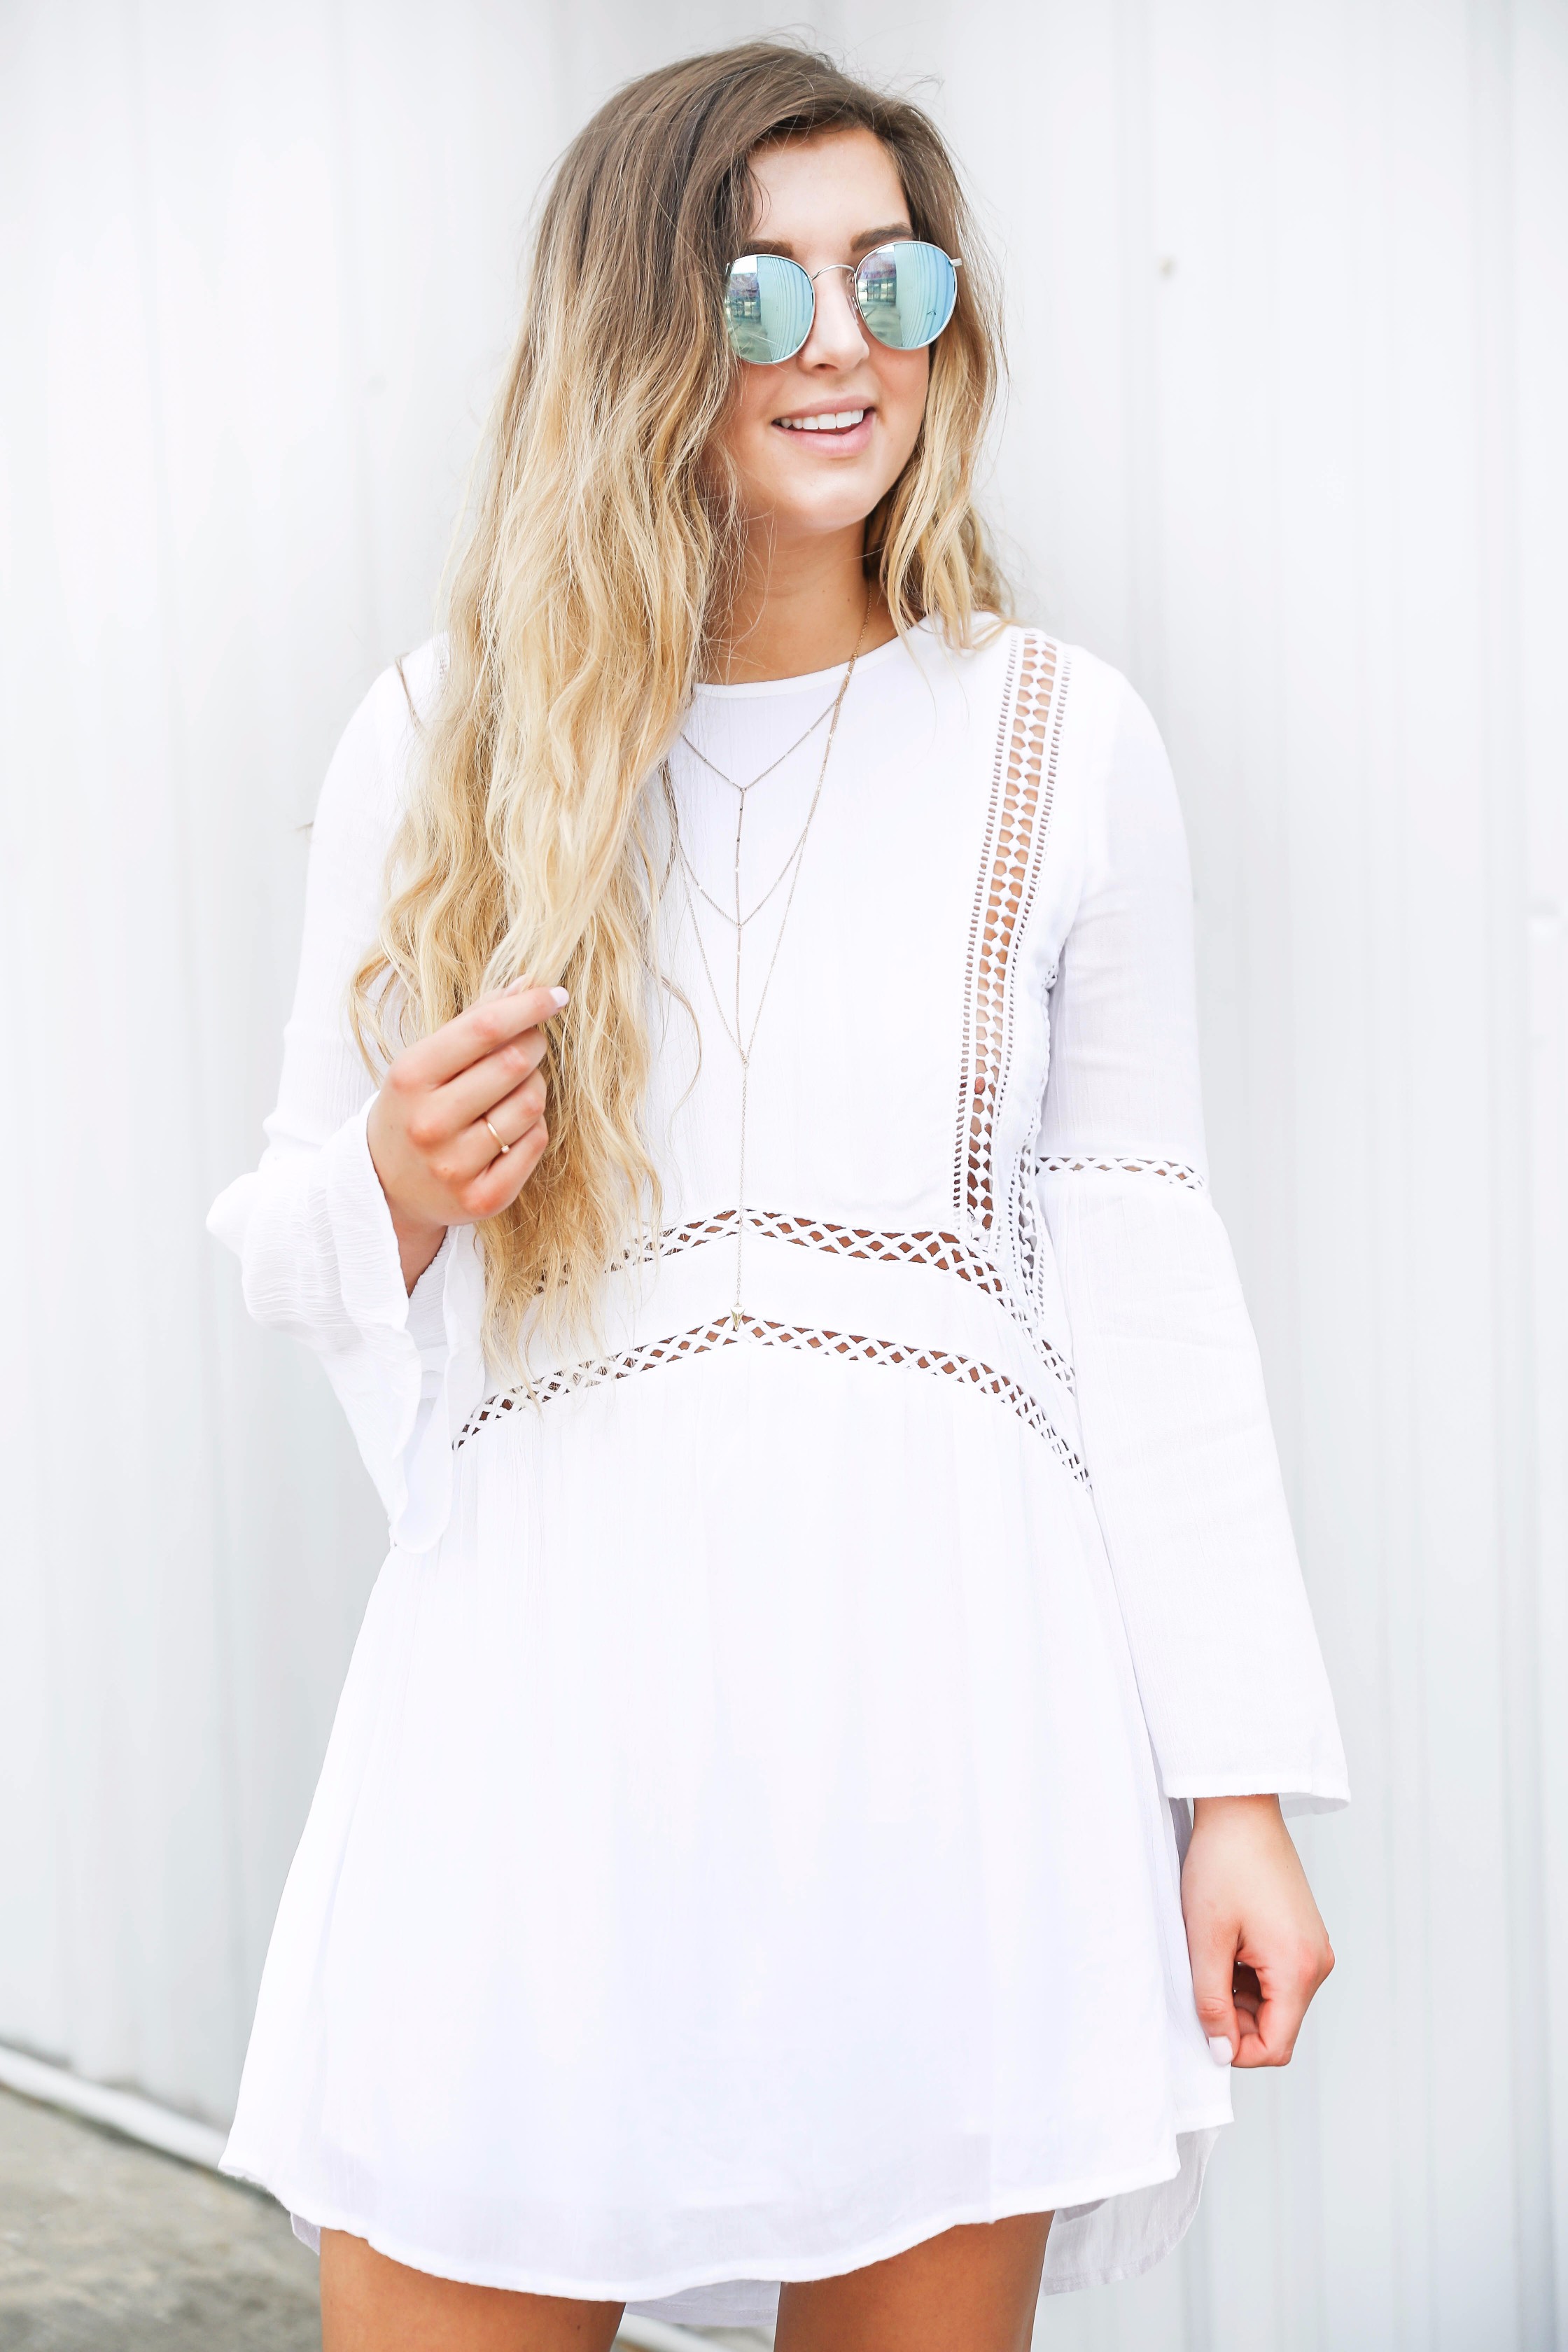 White boho cutout dress with over the knee light brown suede boots! Paired with light blue circle sunglasses. Such a cute dress for summer going into fall! Find the details on fashion blog daily dose of charm by lauren lindmark